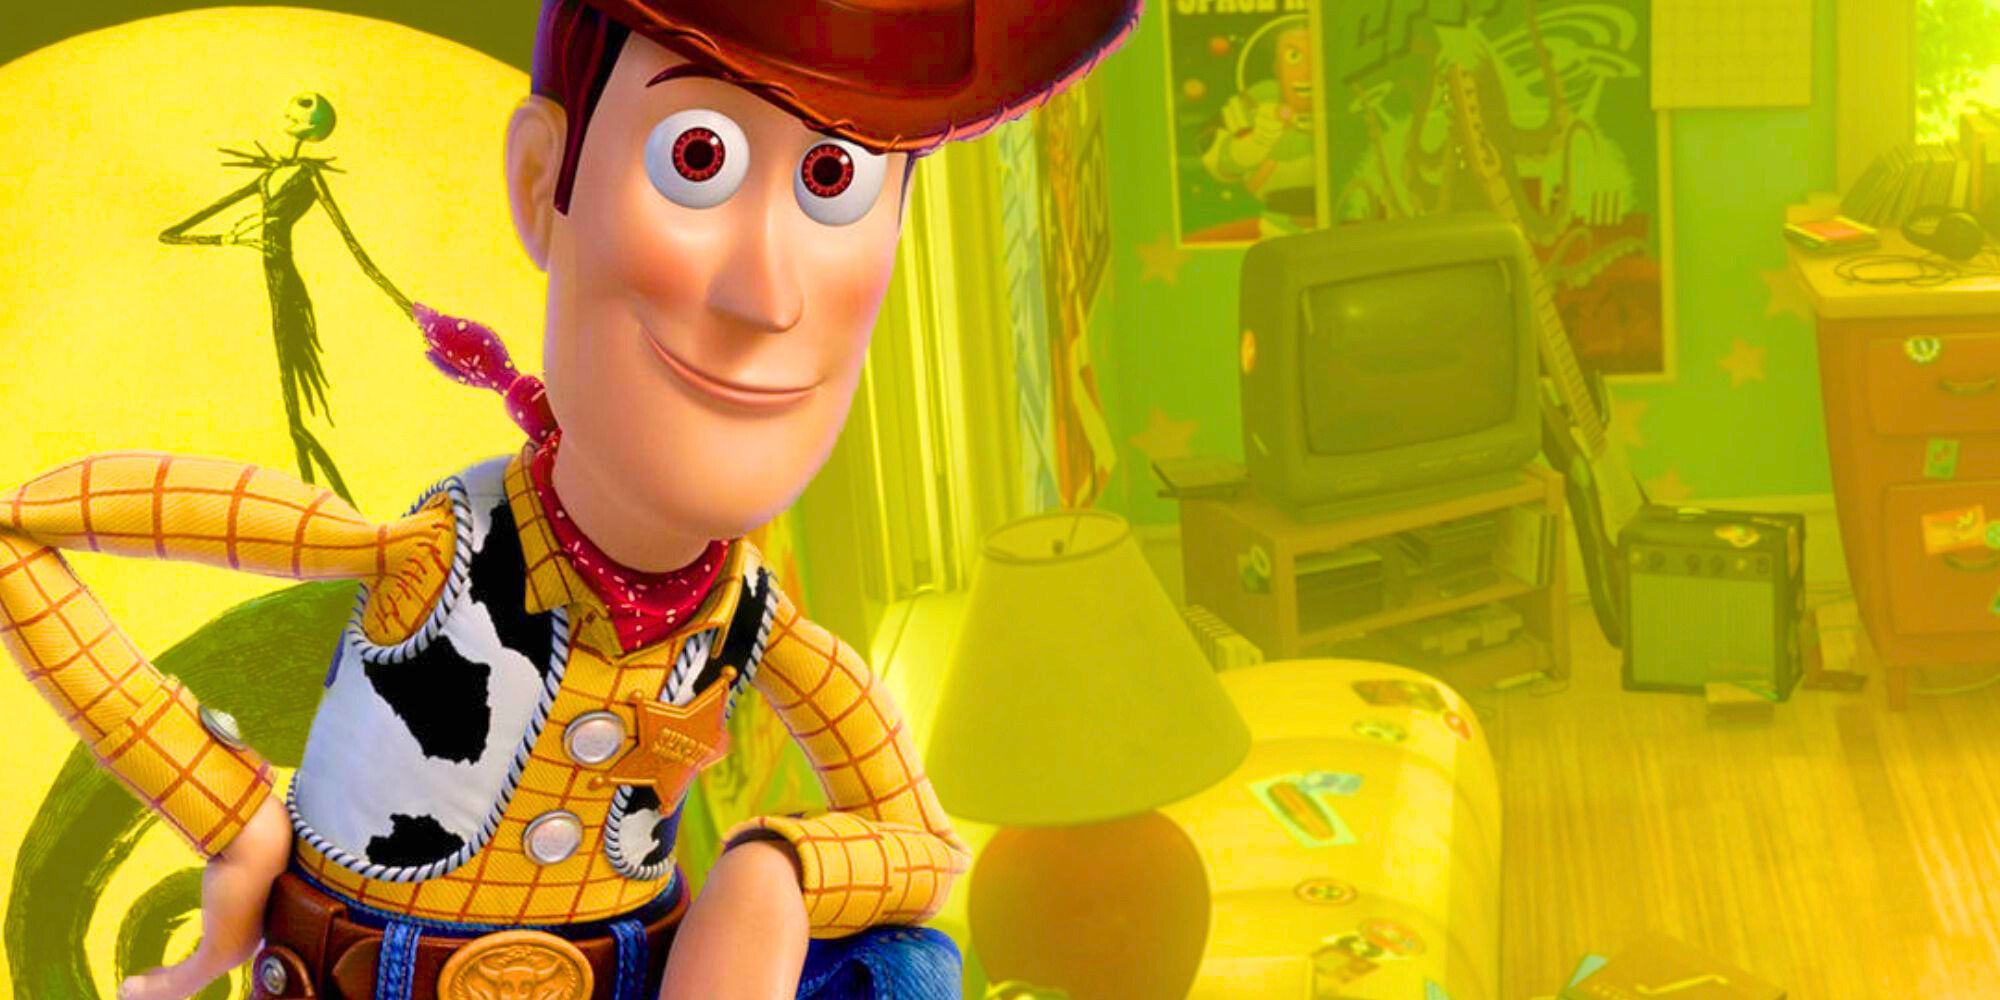 Toy Story's Woody against a blended backdrop of The Nightmare Before Christmas and Toy Story 3